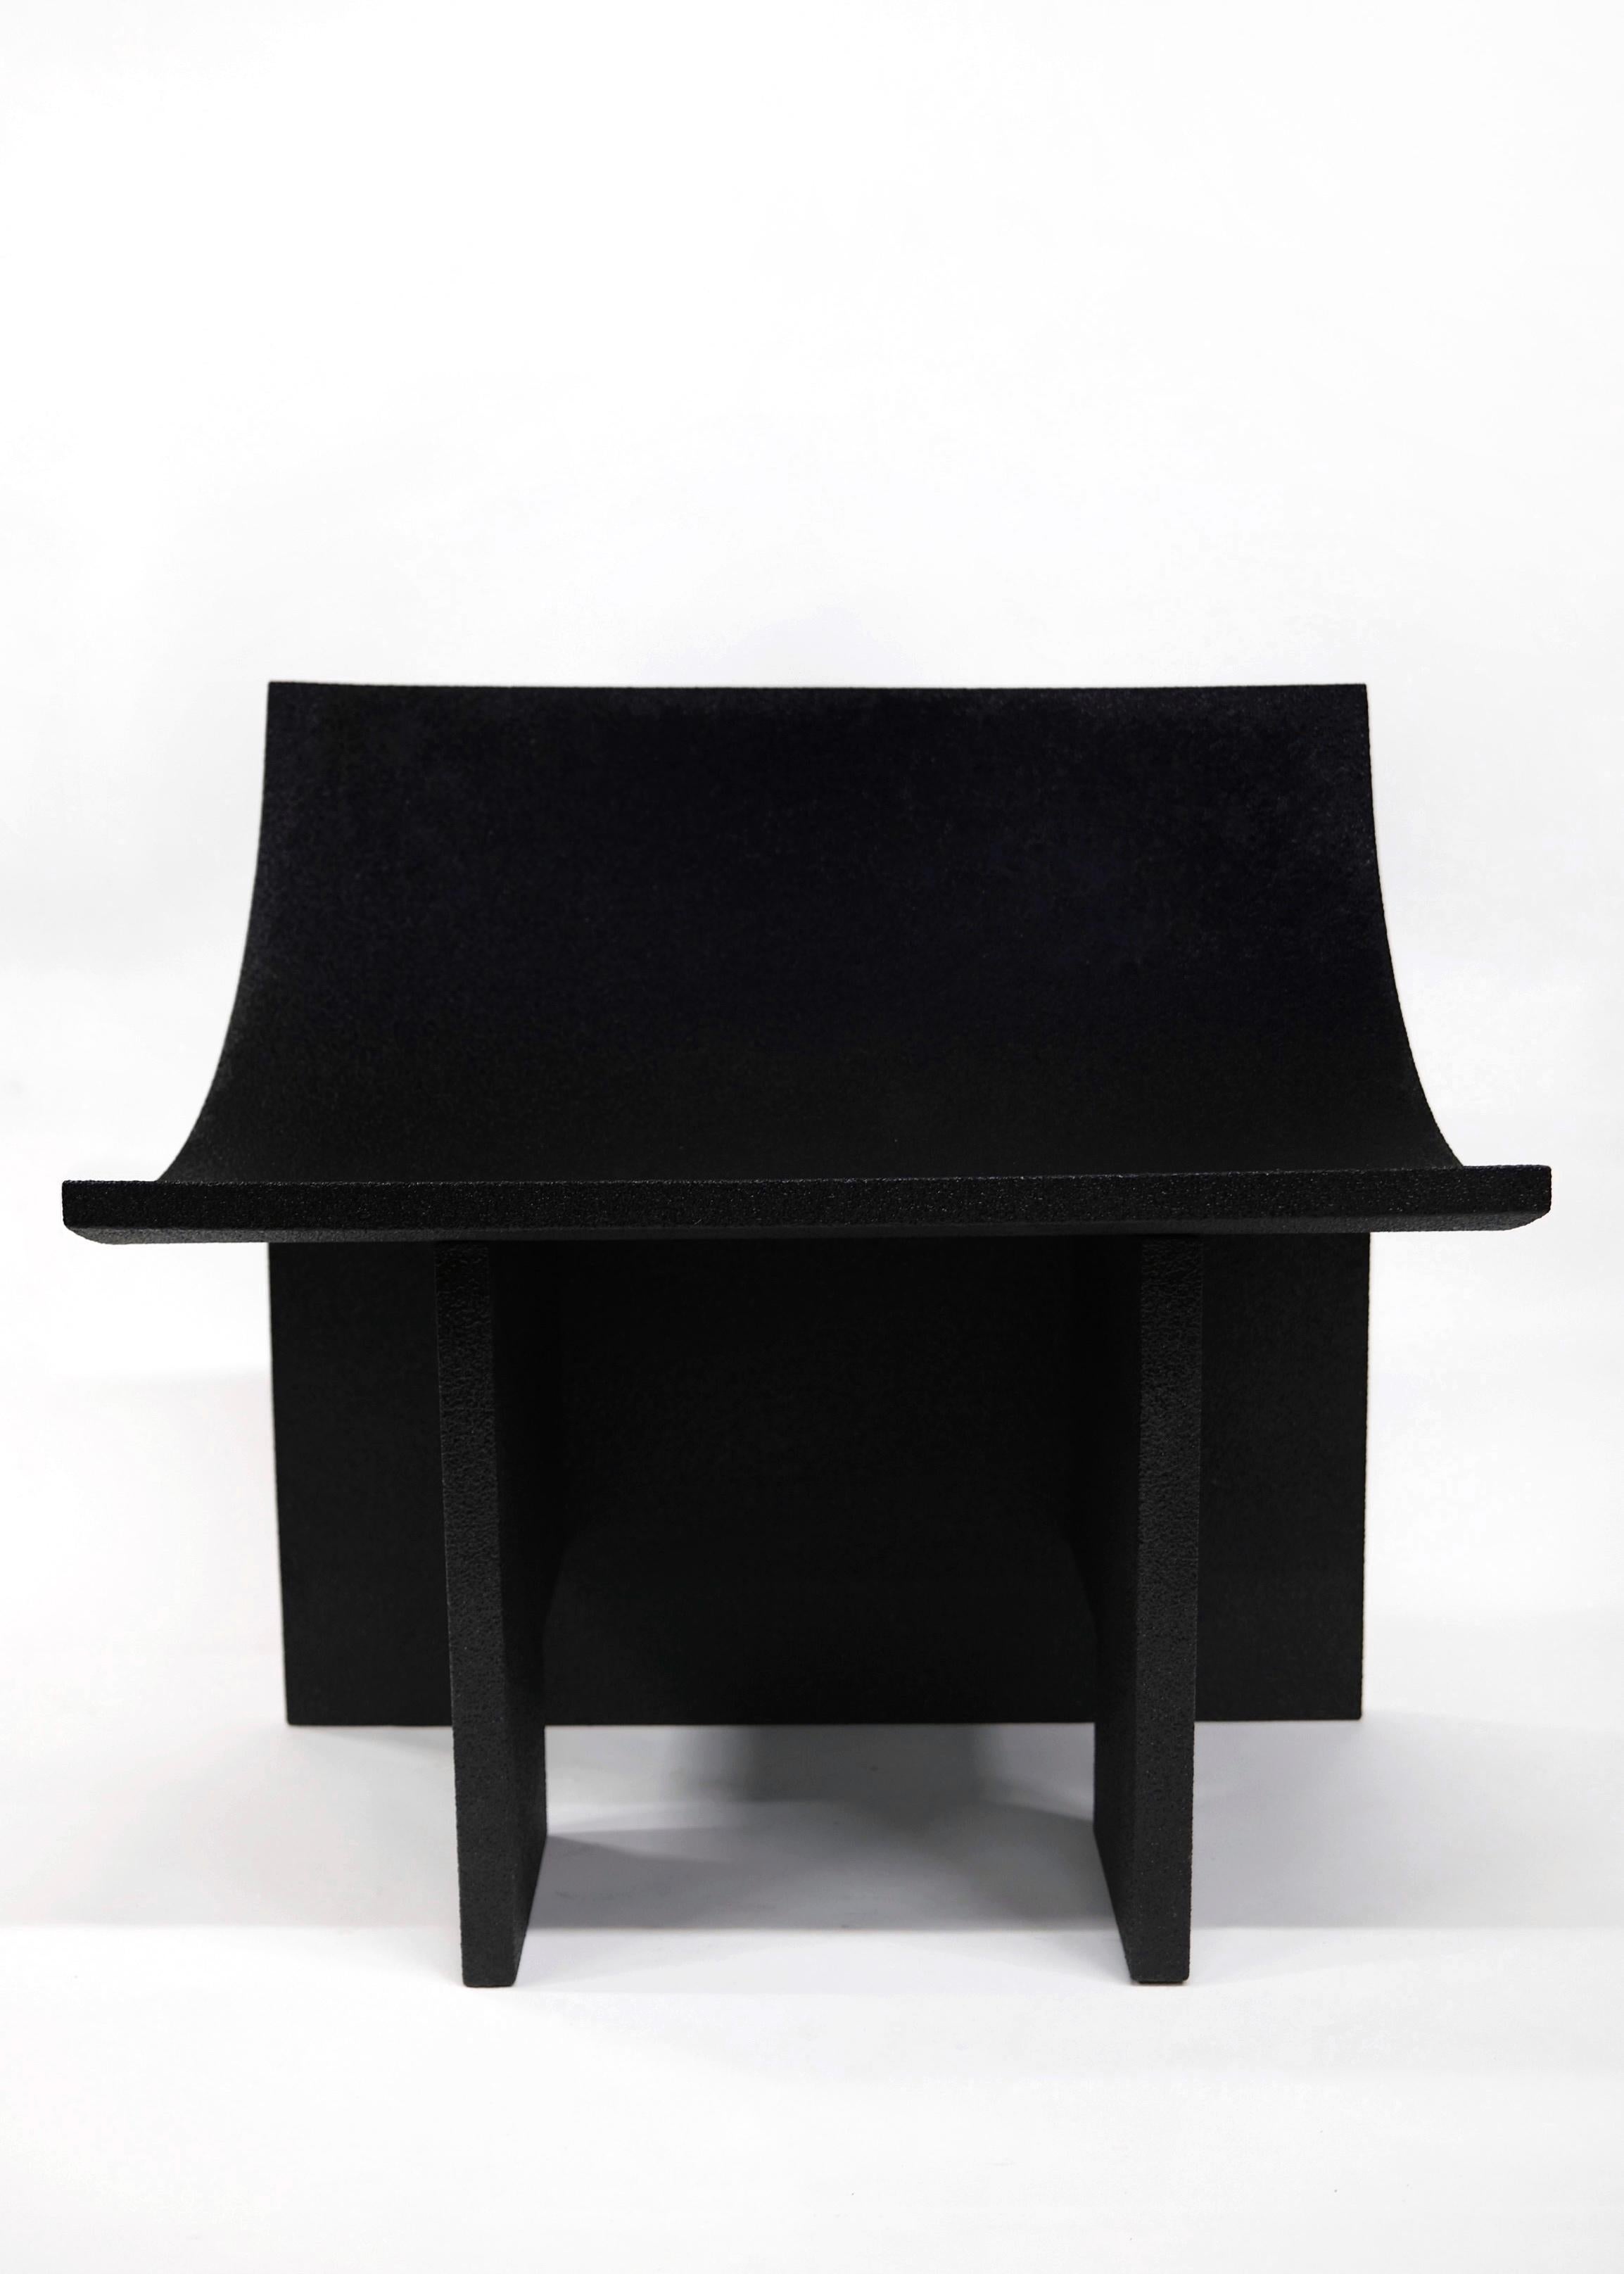 JD01 Noir Contemporary Chair in Plywood 2